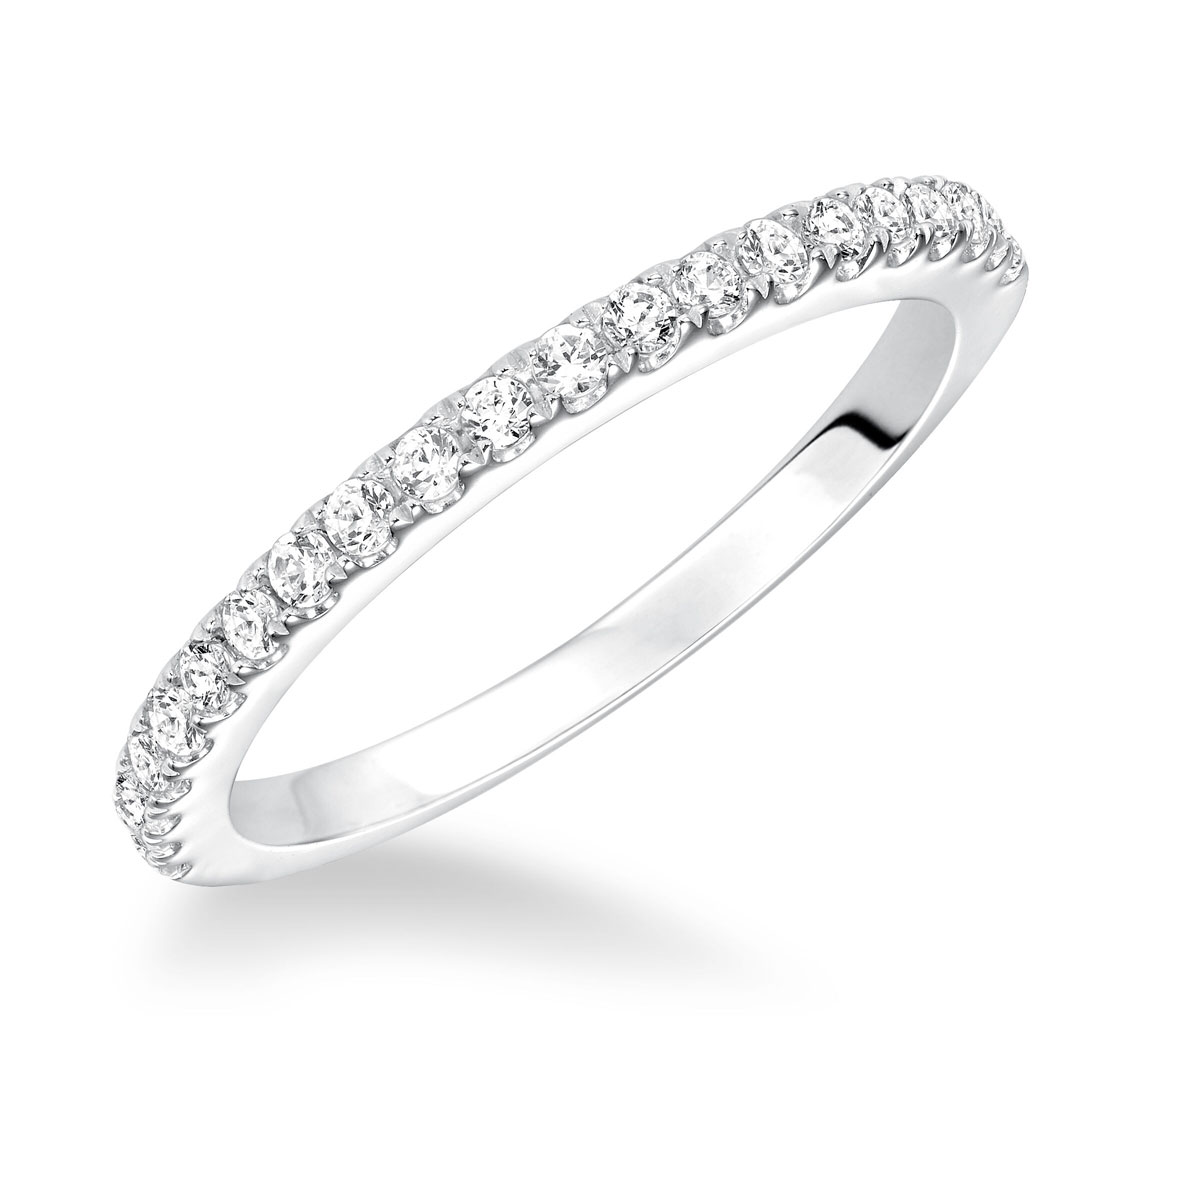 Diamond Pave Prong Set Wedding Band in White Gold, 0.31